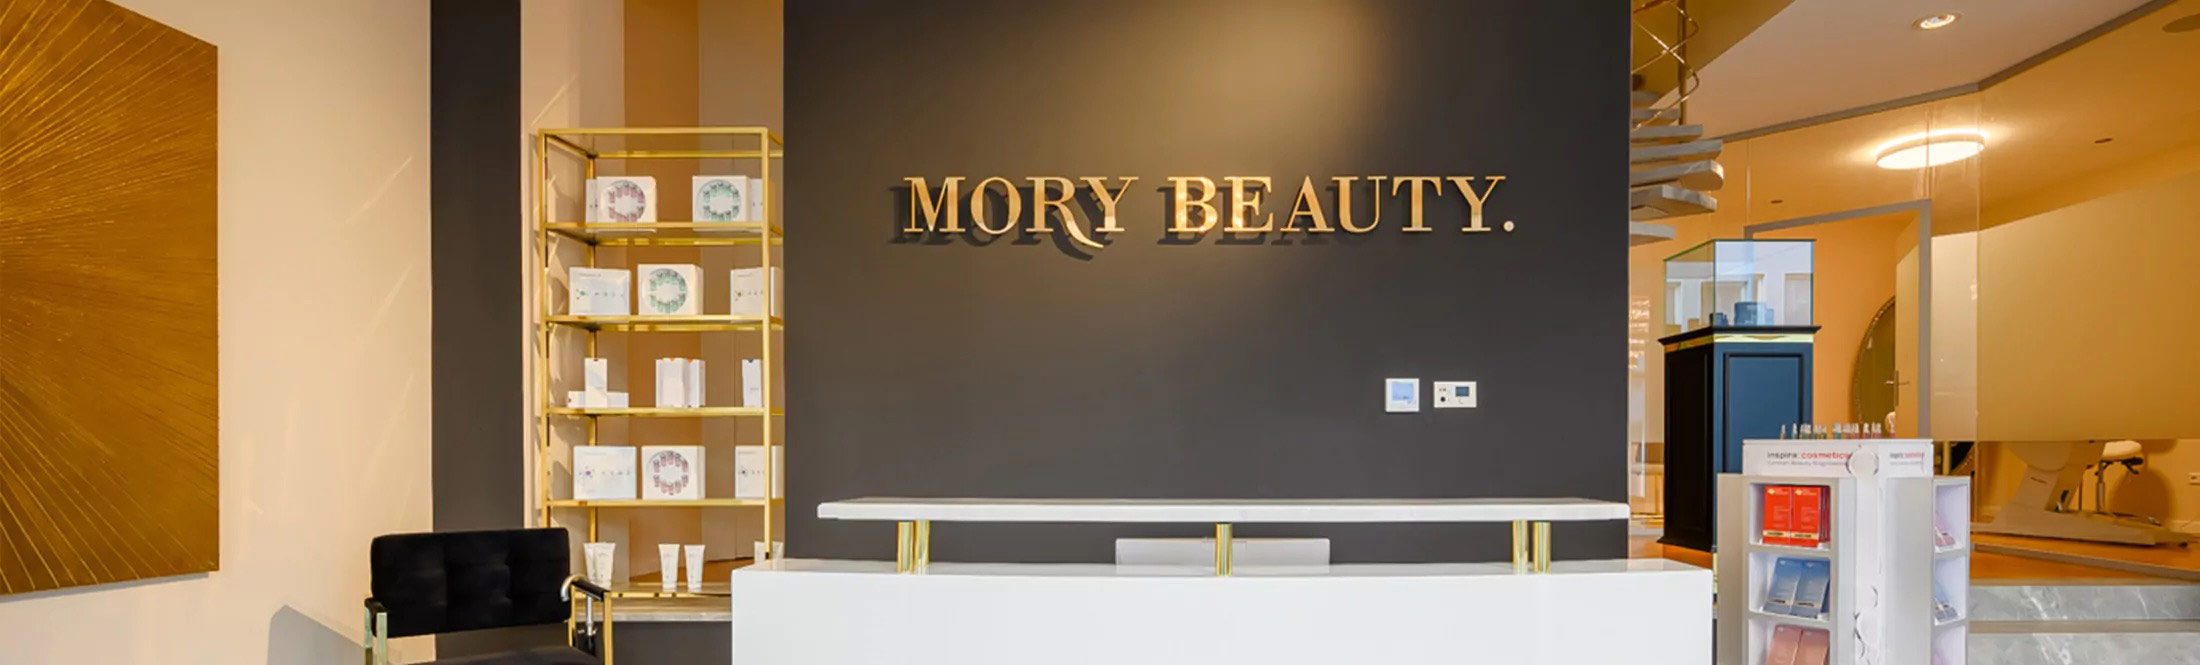 Terminanfrage bei Mory Beauty